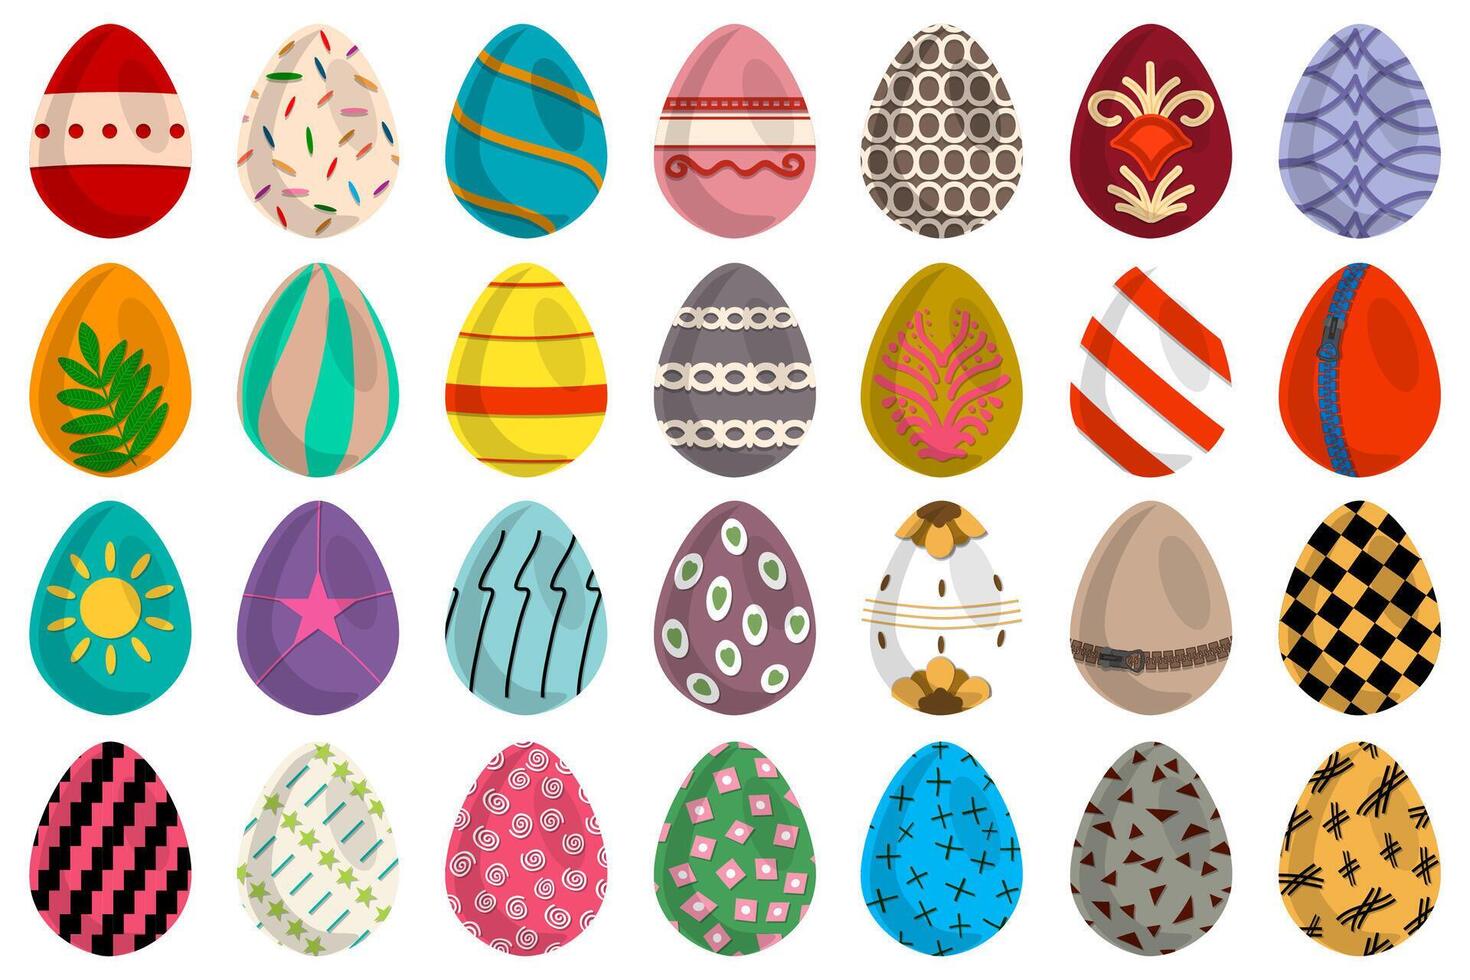 Illustration on theme celebration holiday Easter with hunt colorful bright eggs vector